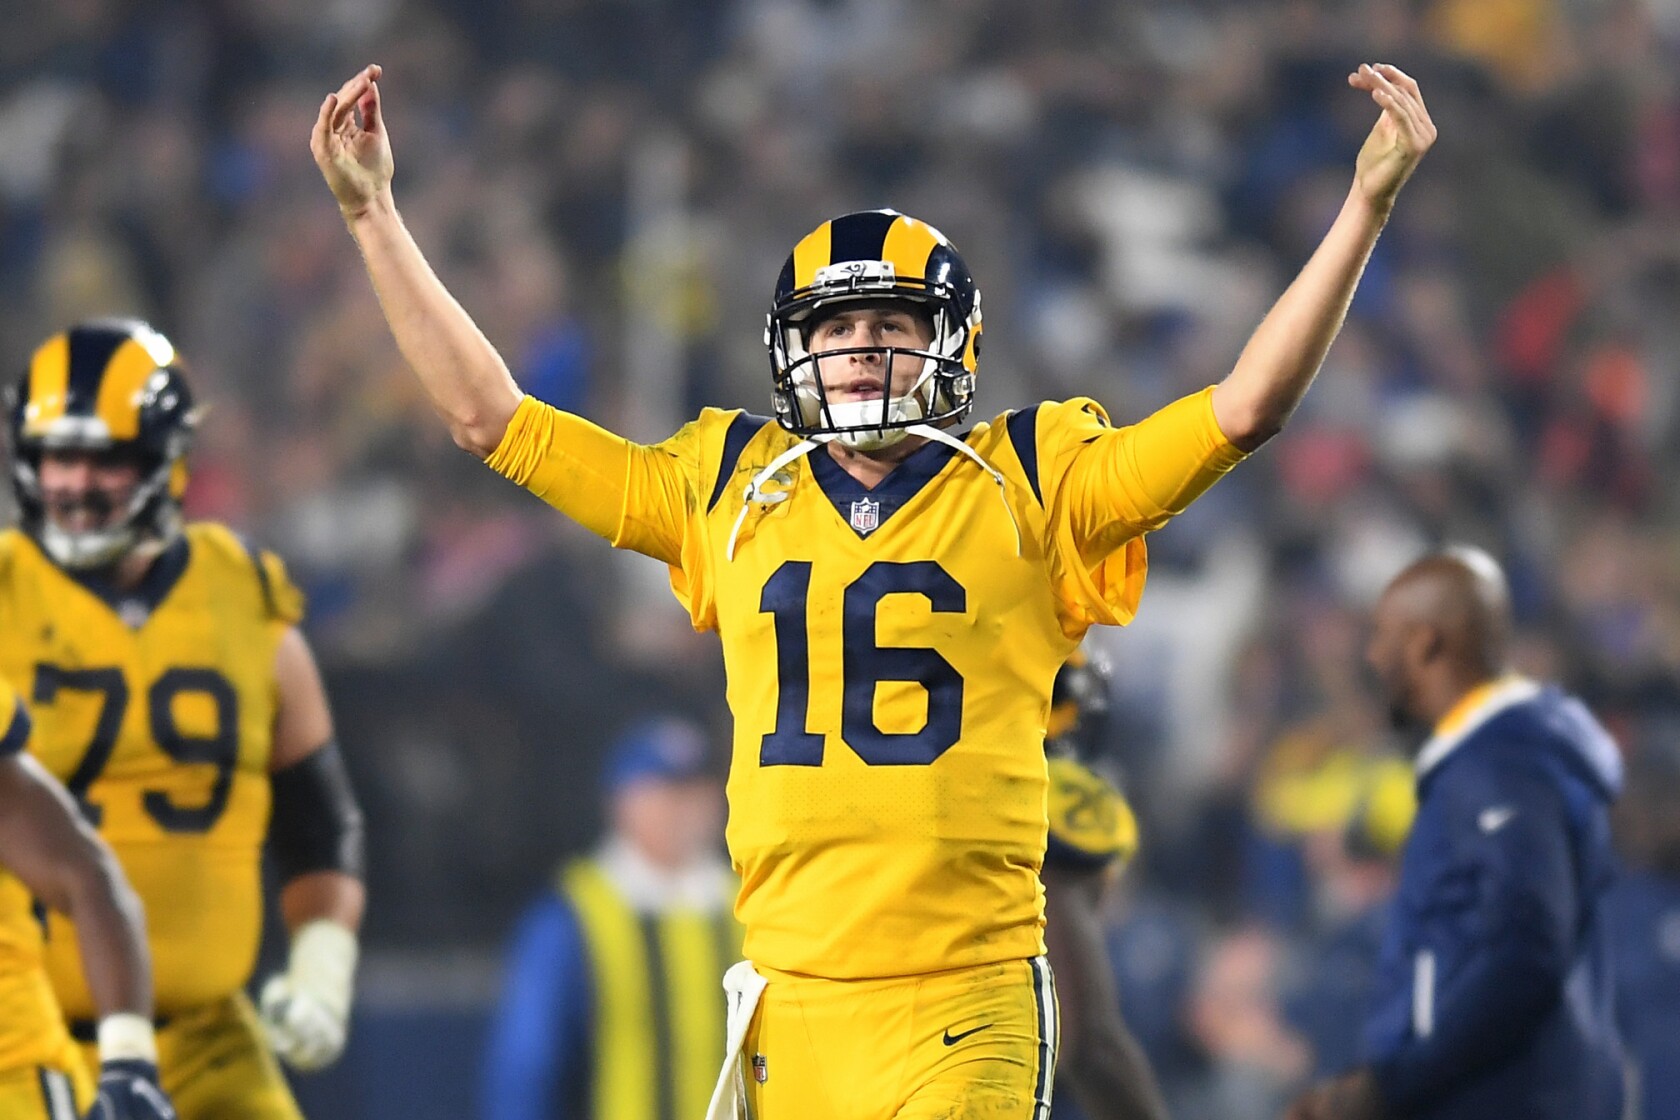 Rams outduel Chiefs 54-51 in highest-scoring 'Monday Night Football' game ever - Los Angeles Times